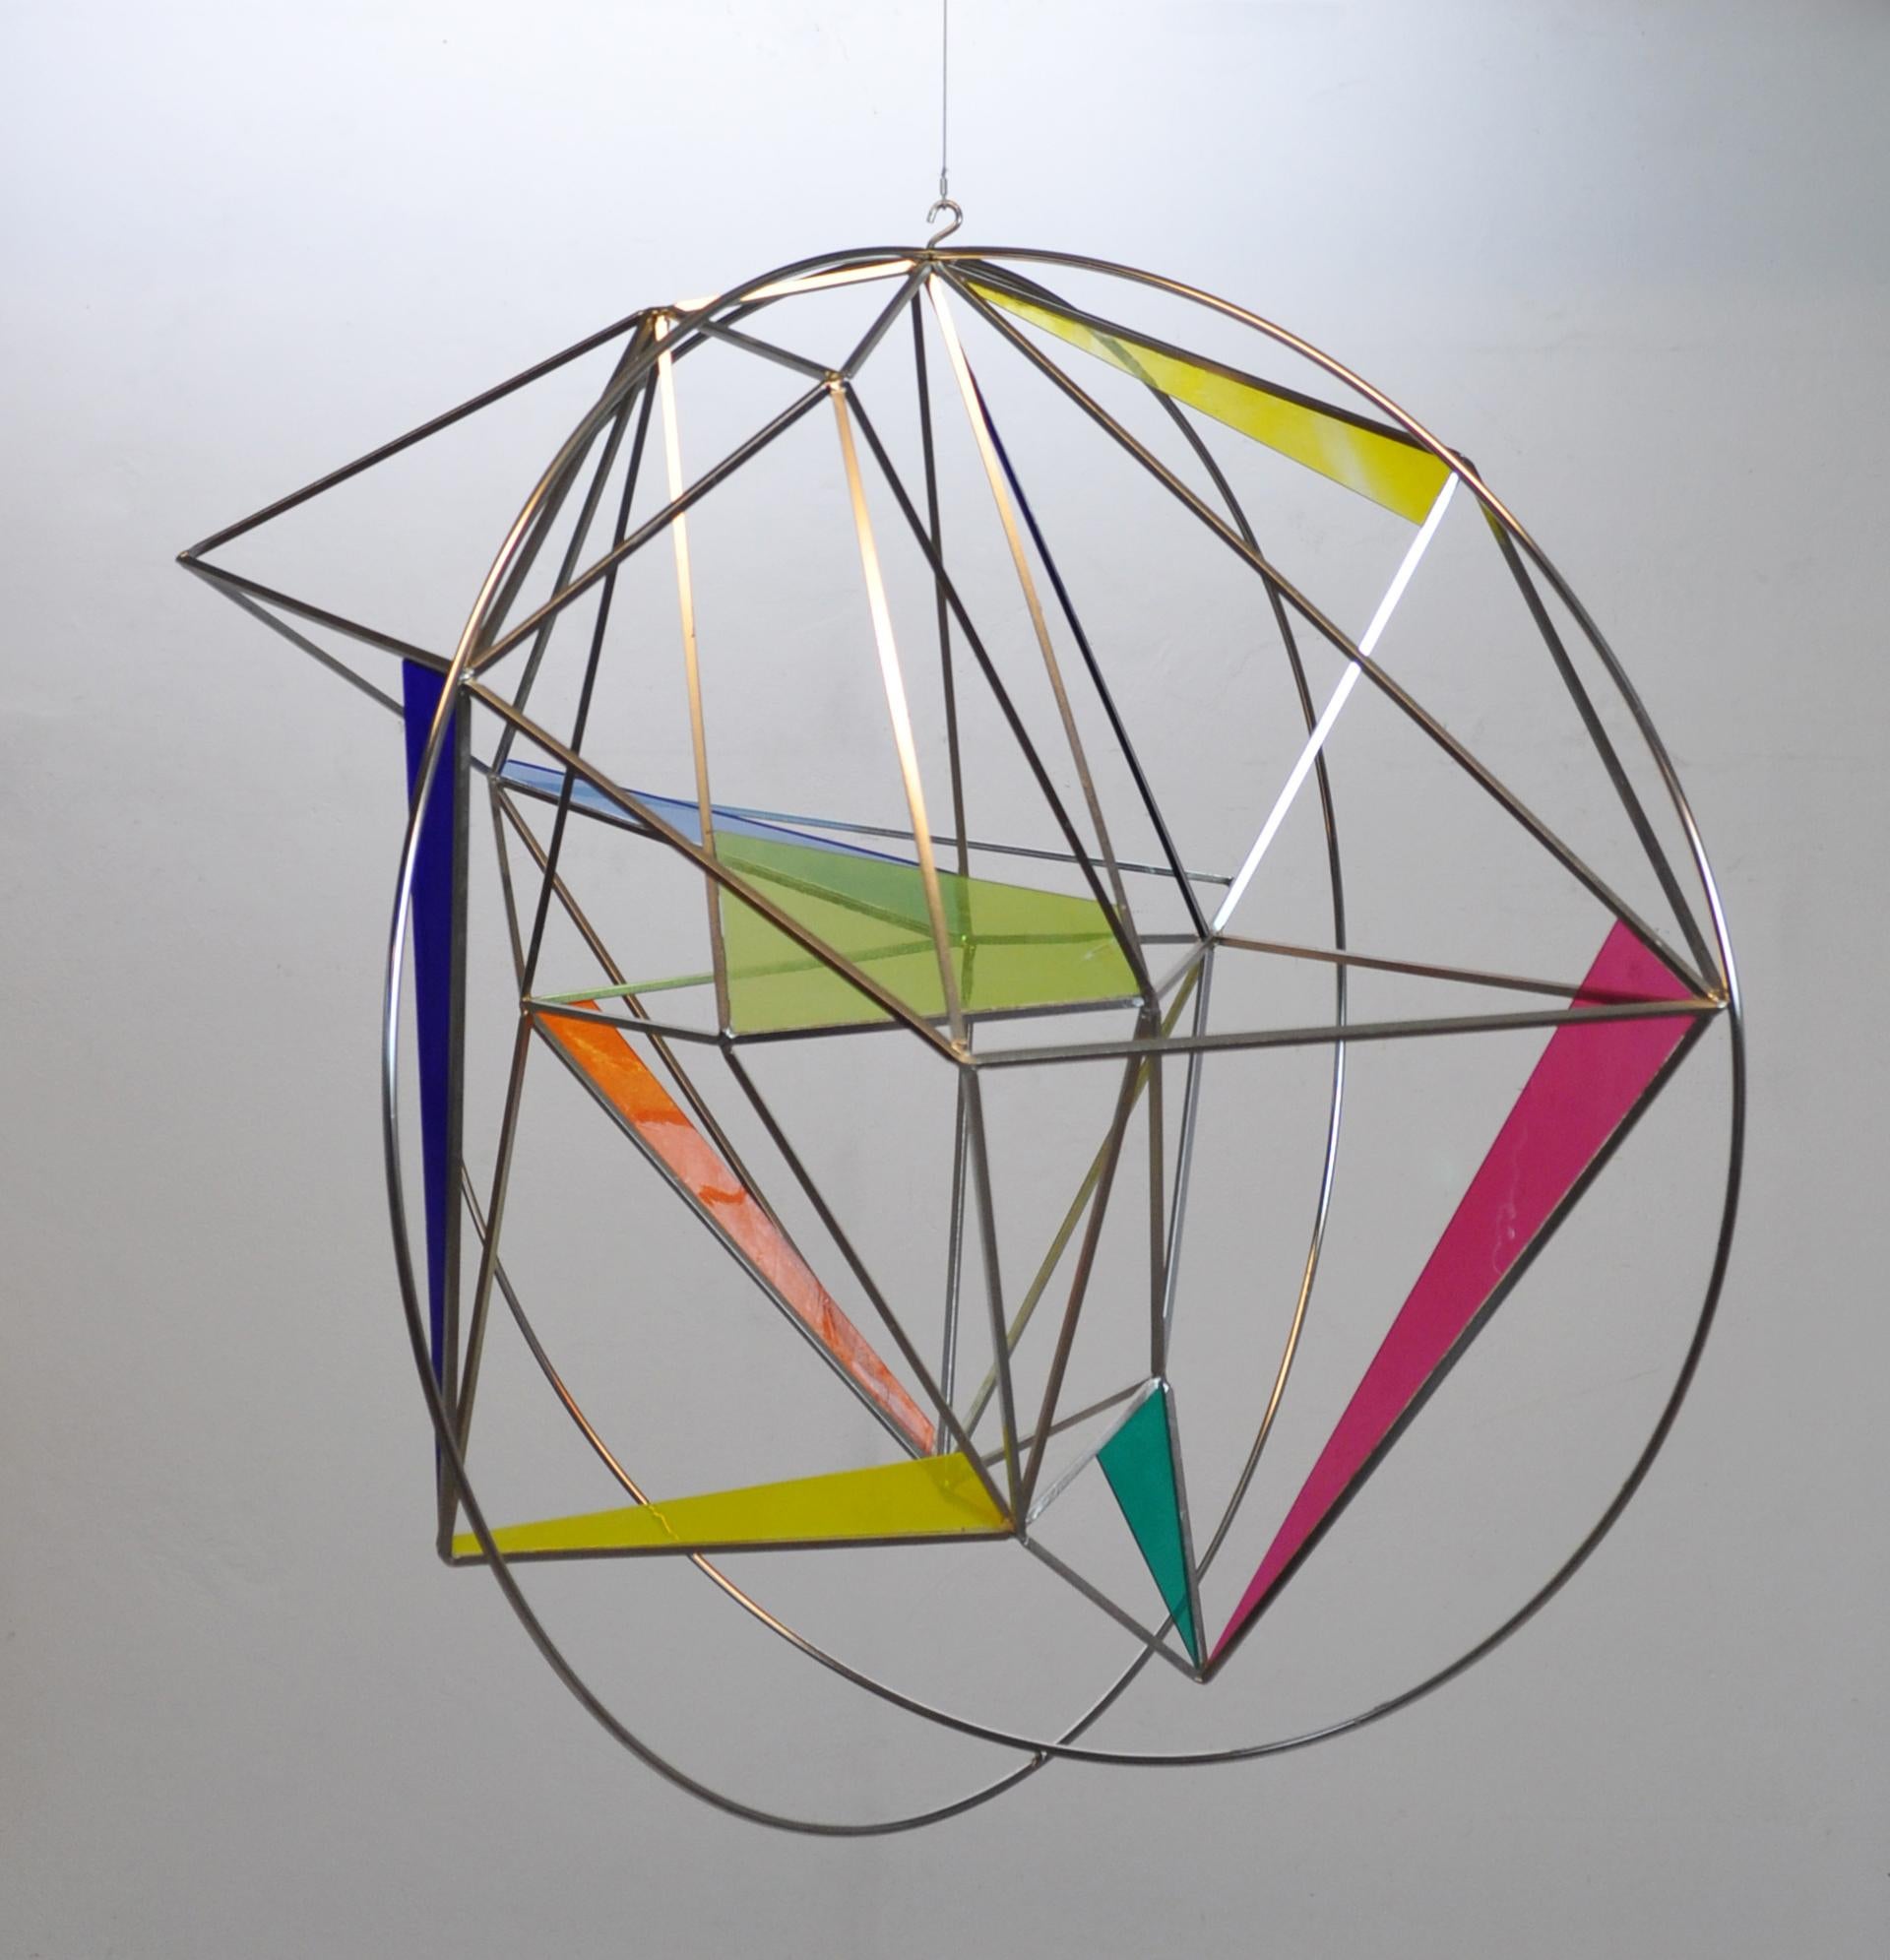 Contemporary Abstract Geometric Sculpture "Globe" - Mixed Media Art by Peter Stuhr